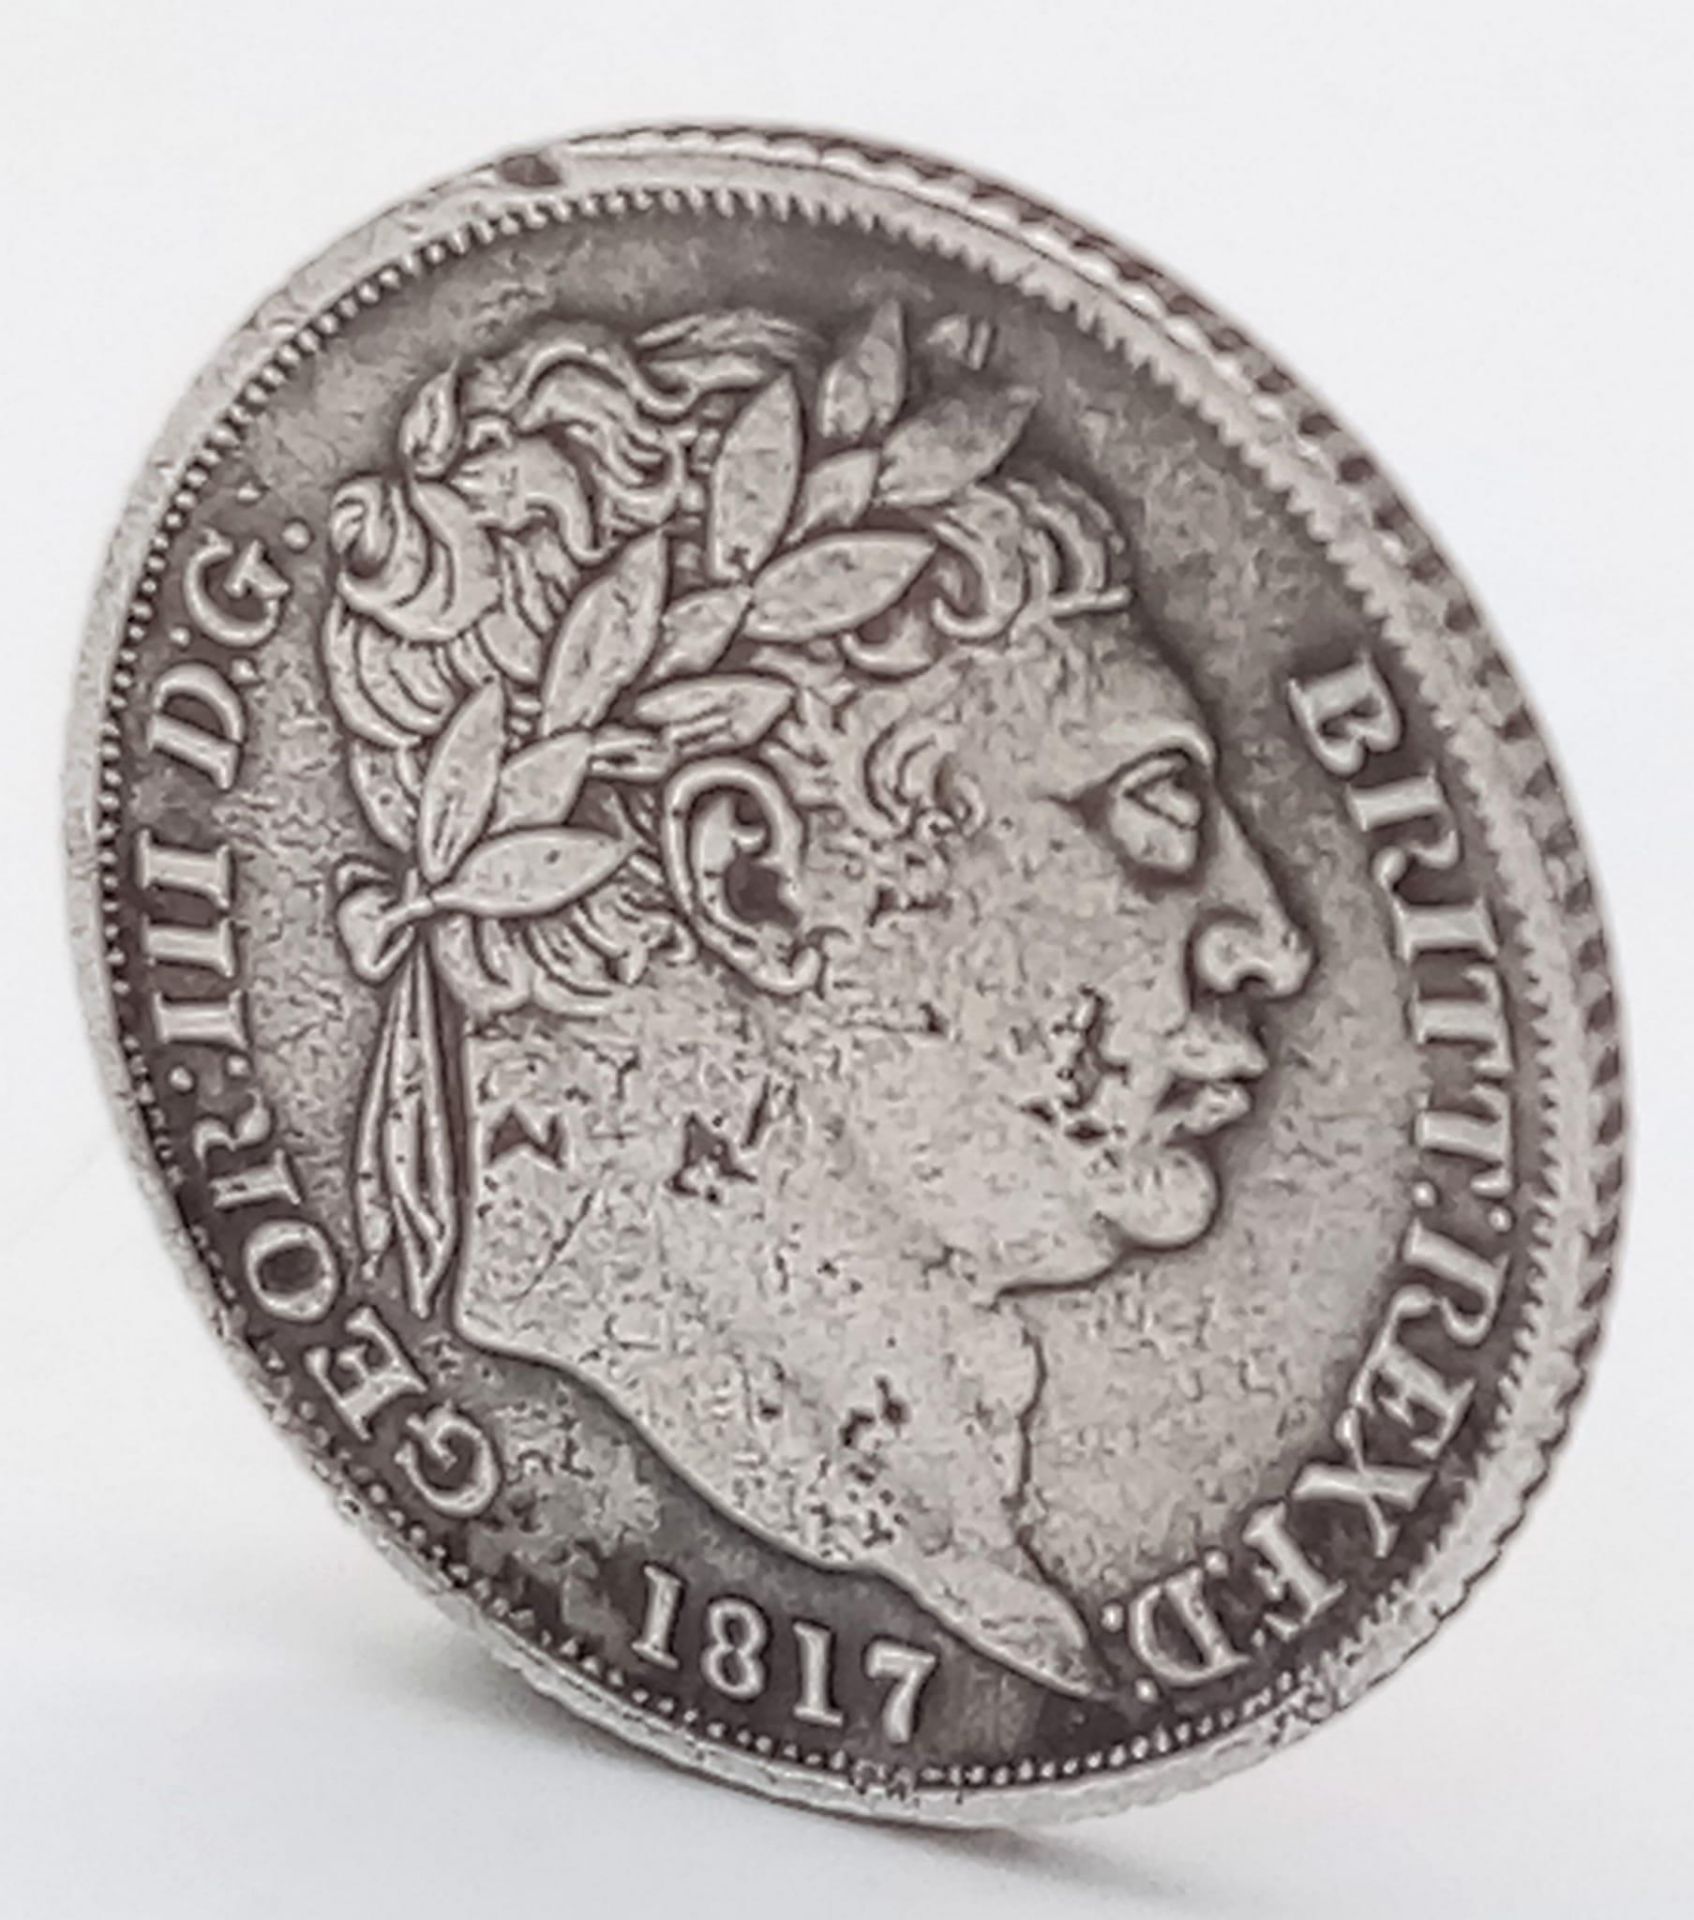 An 1817 George III Silver Sixpence Coin. Decent grade but please see photos.